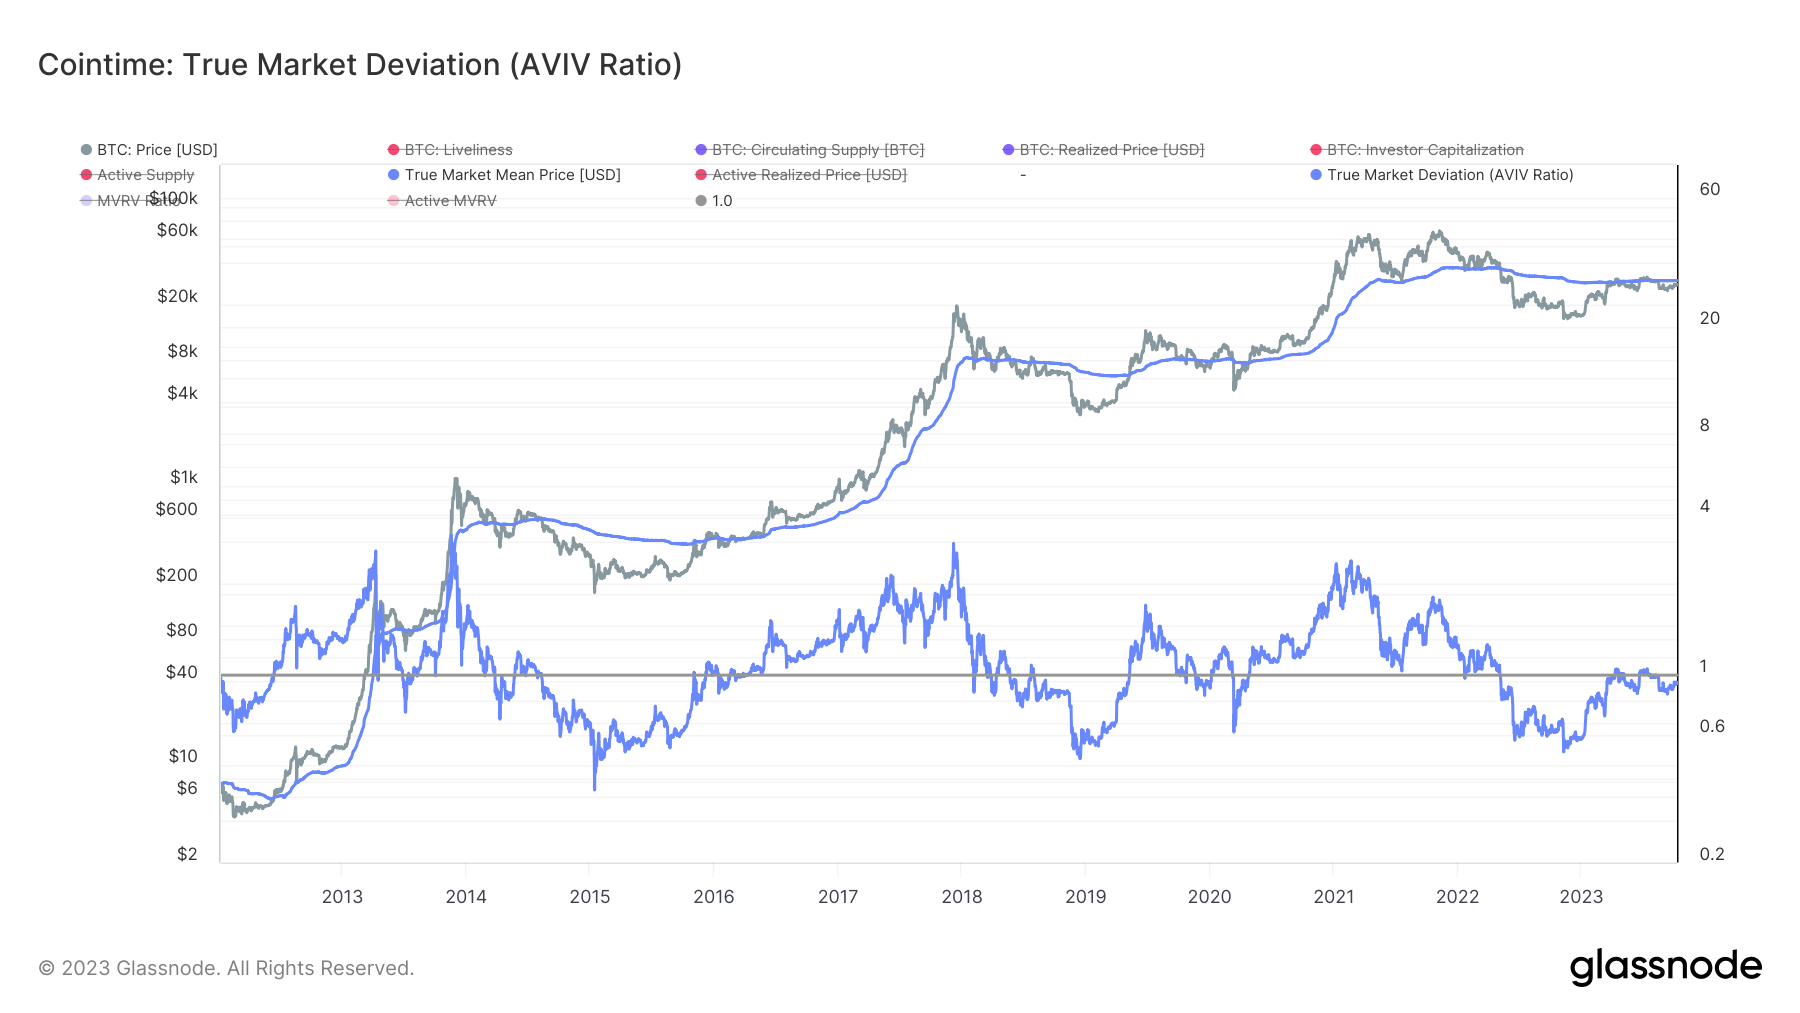 Active investor price: a fresh perspective on Bitcoin’s valuation